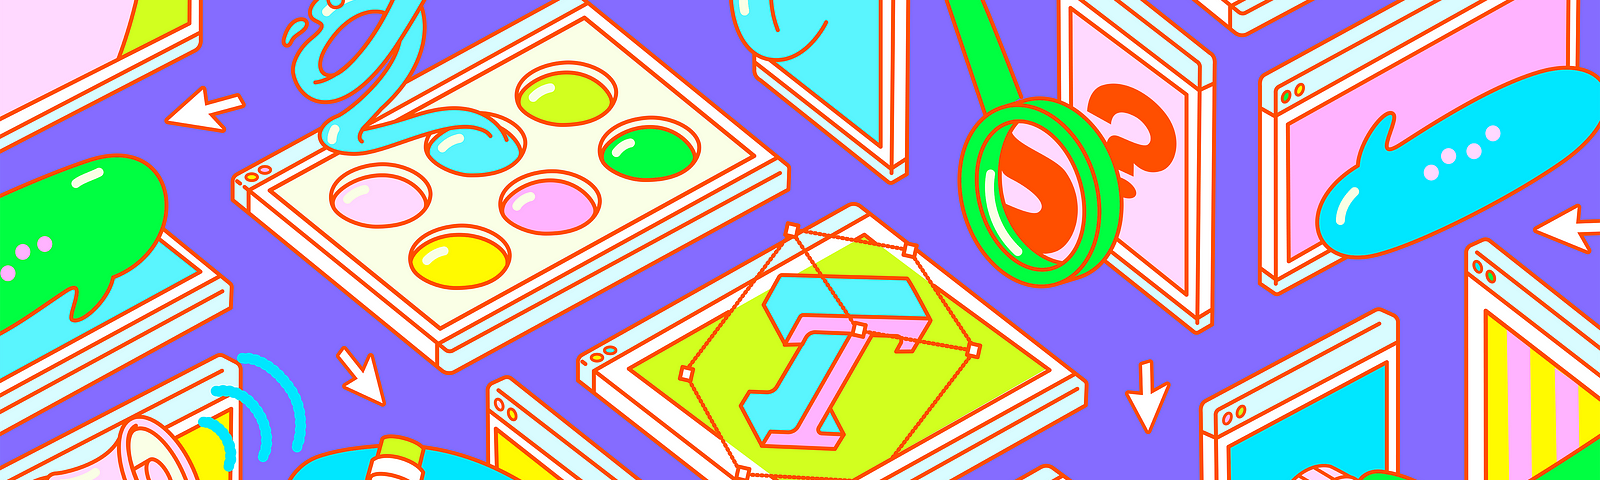 An pink, yellow, teal, and lime green illustration of squares and rectangles on a purple background. From three of the rectangles emerge a pink hand holding dipping a brush into a palette of paint, a blue hand drawing a circular line with a pen, and green hand turning a knob. More rectangles and squares with speech bubbles, pairs of eyes, an ear, a megaphone, and a capital T in a bounding box.